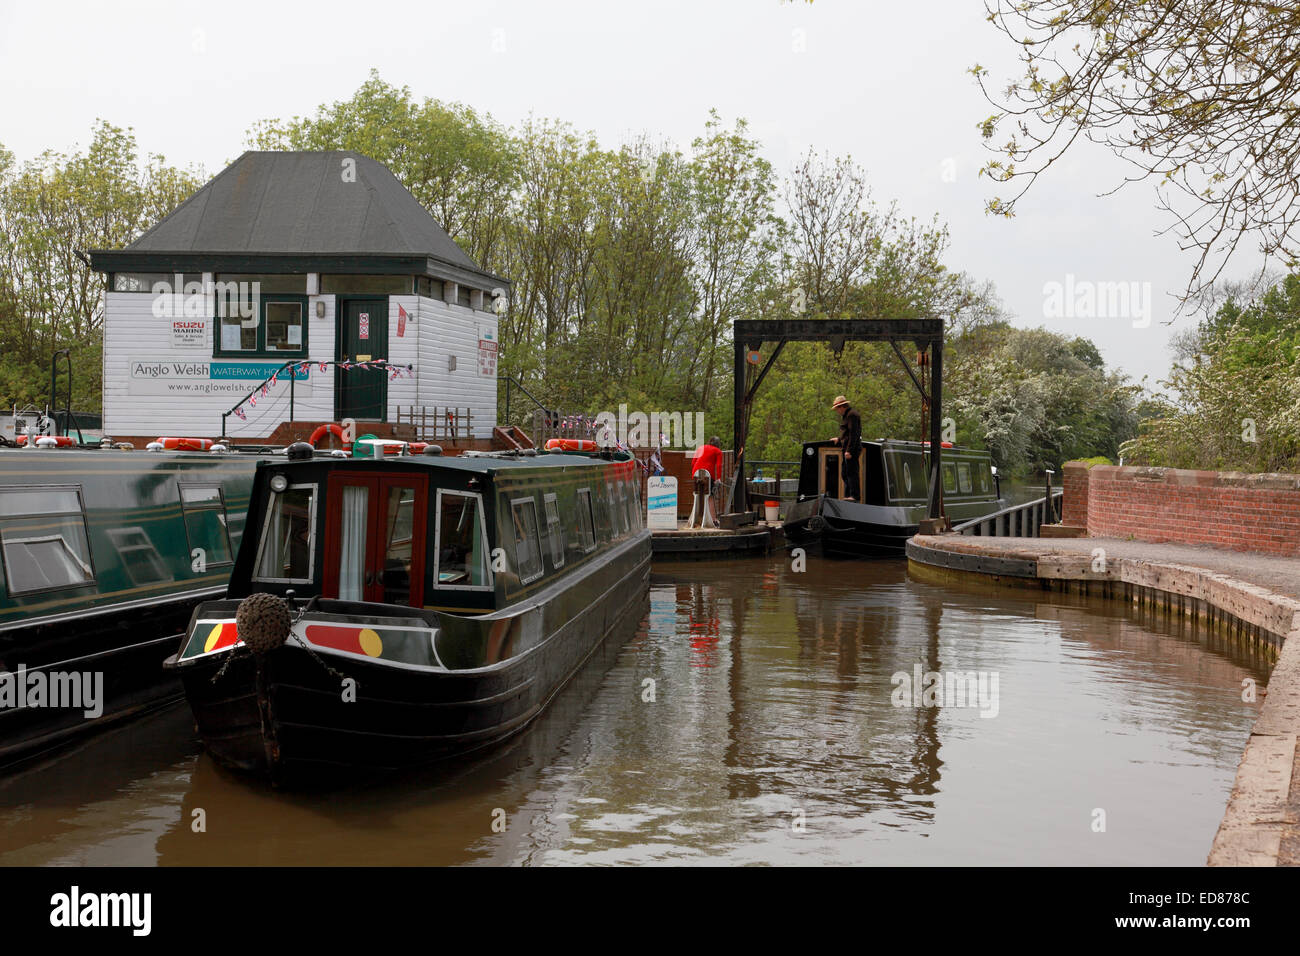 A narrowboat on the aqueduct at Wootton Wawen on the Stratford upon Avon Canal next to the Anglo Welsh hire company base Stock Photo